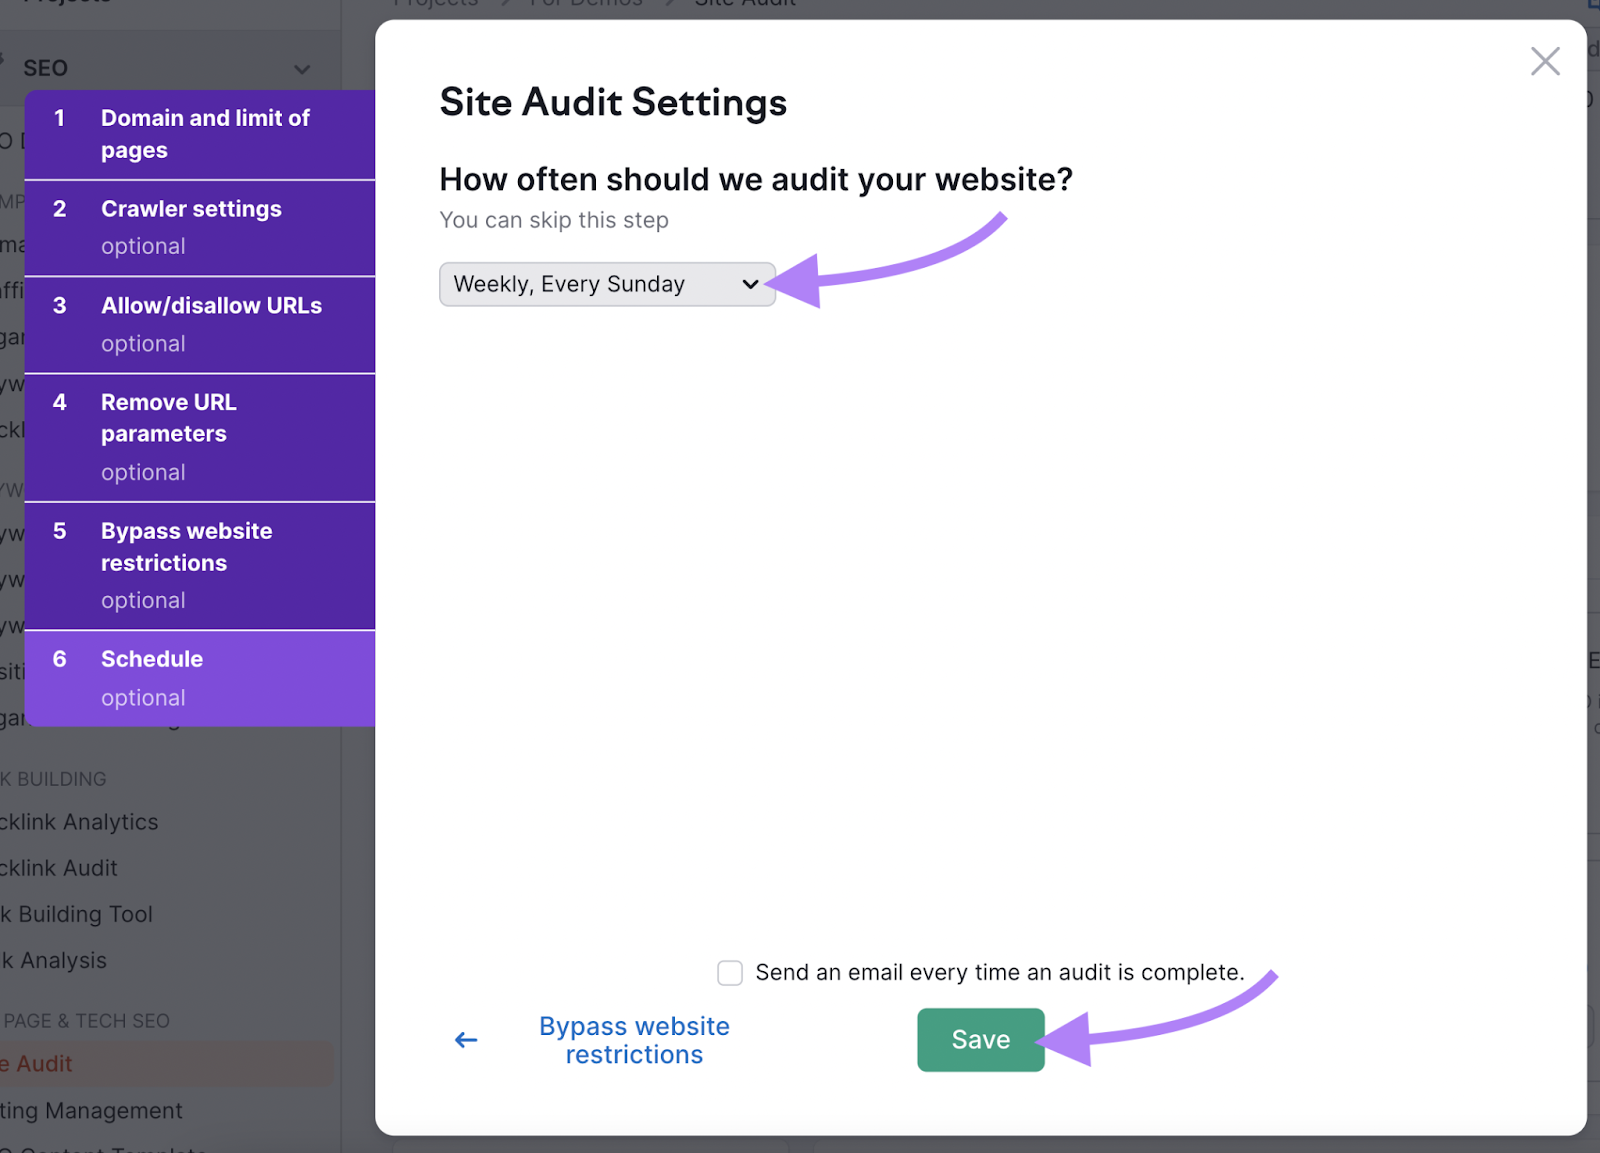 where to choose daily or weekly audits in Settings